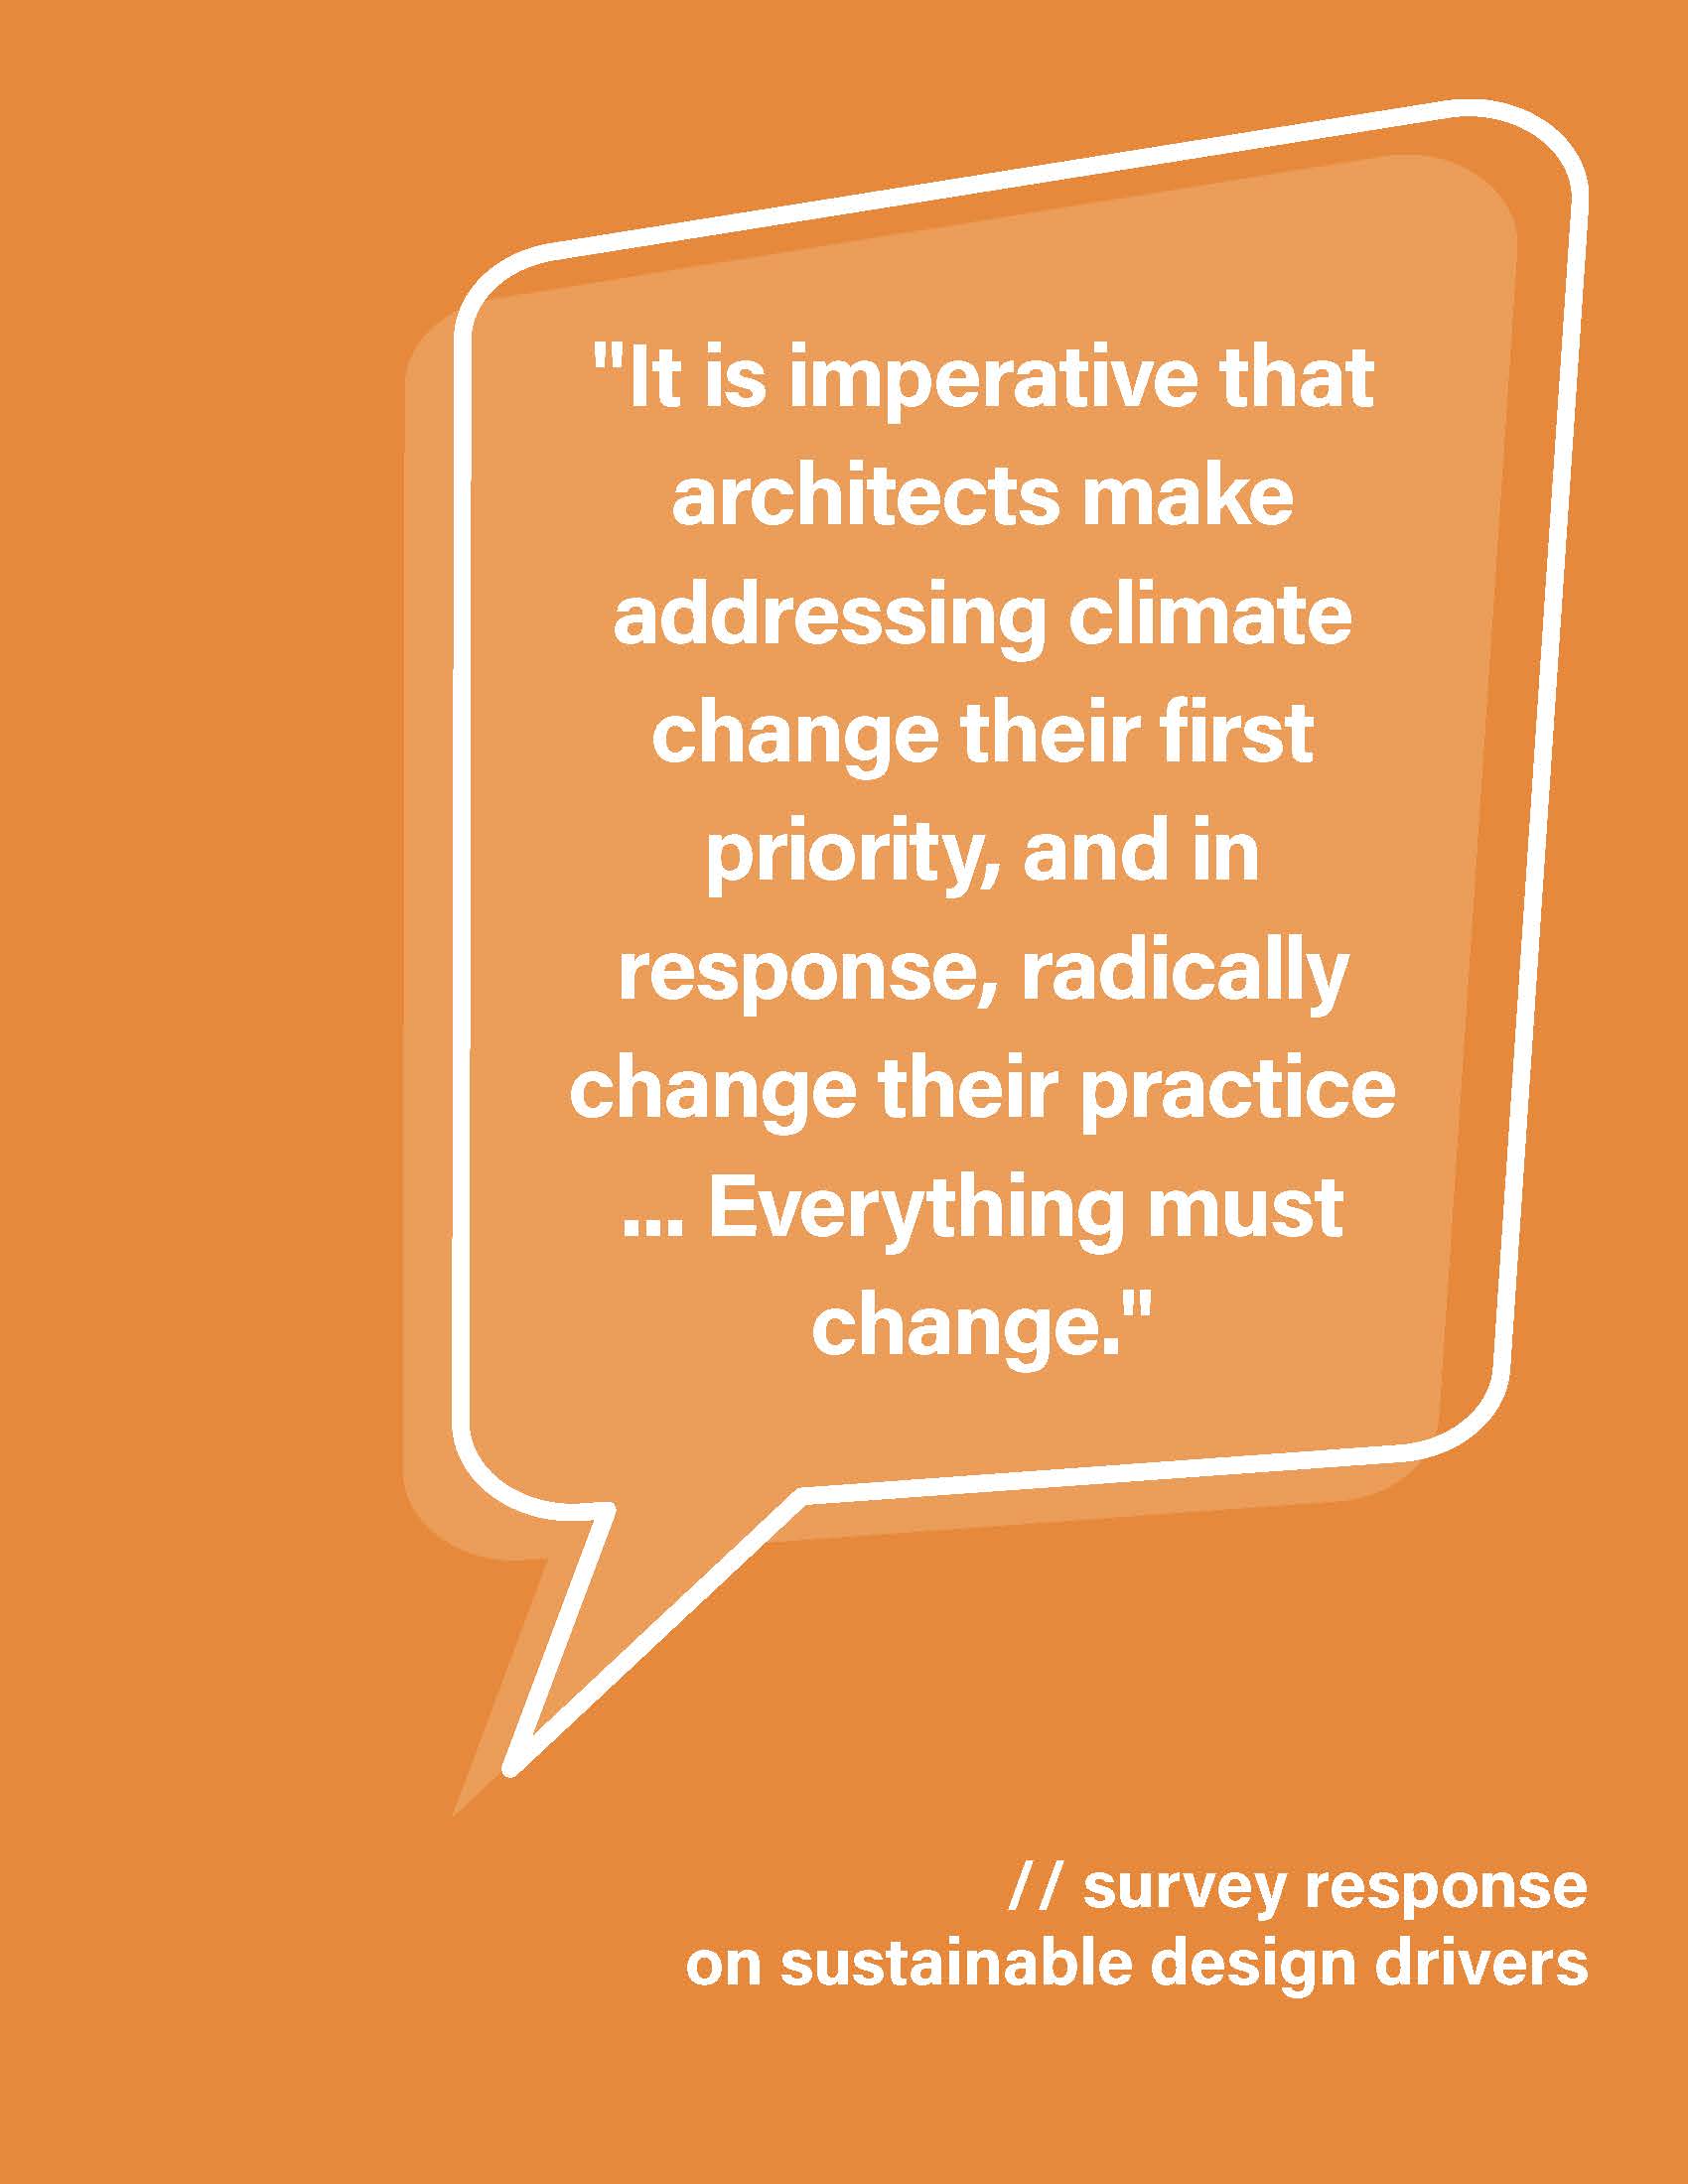 "It is imperative that architects make addressing climate change their first priority, and in response, radically change their practice... Everything must change." survey response on sustainable design drivers